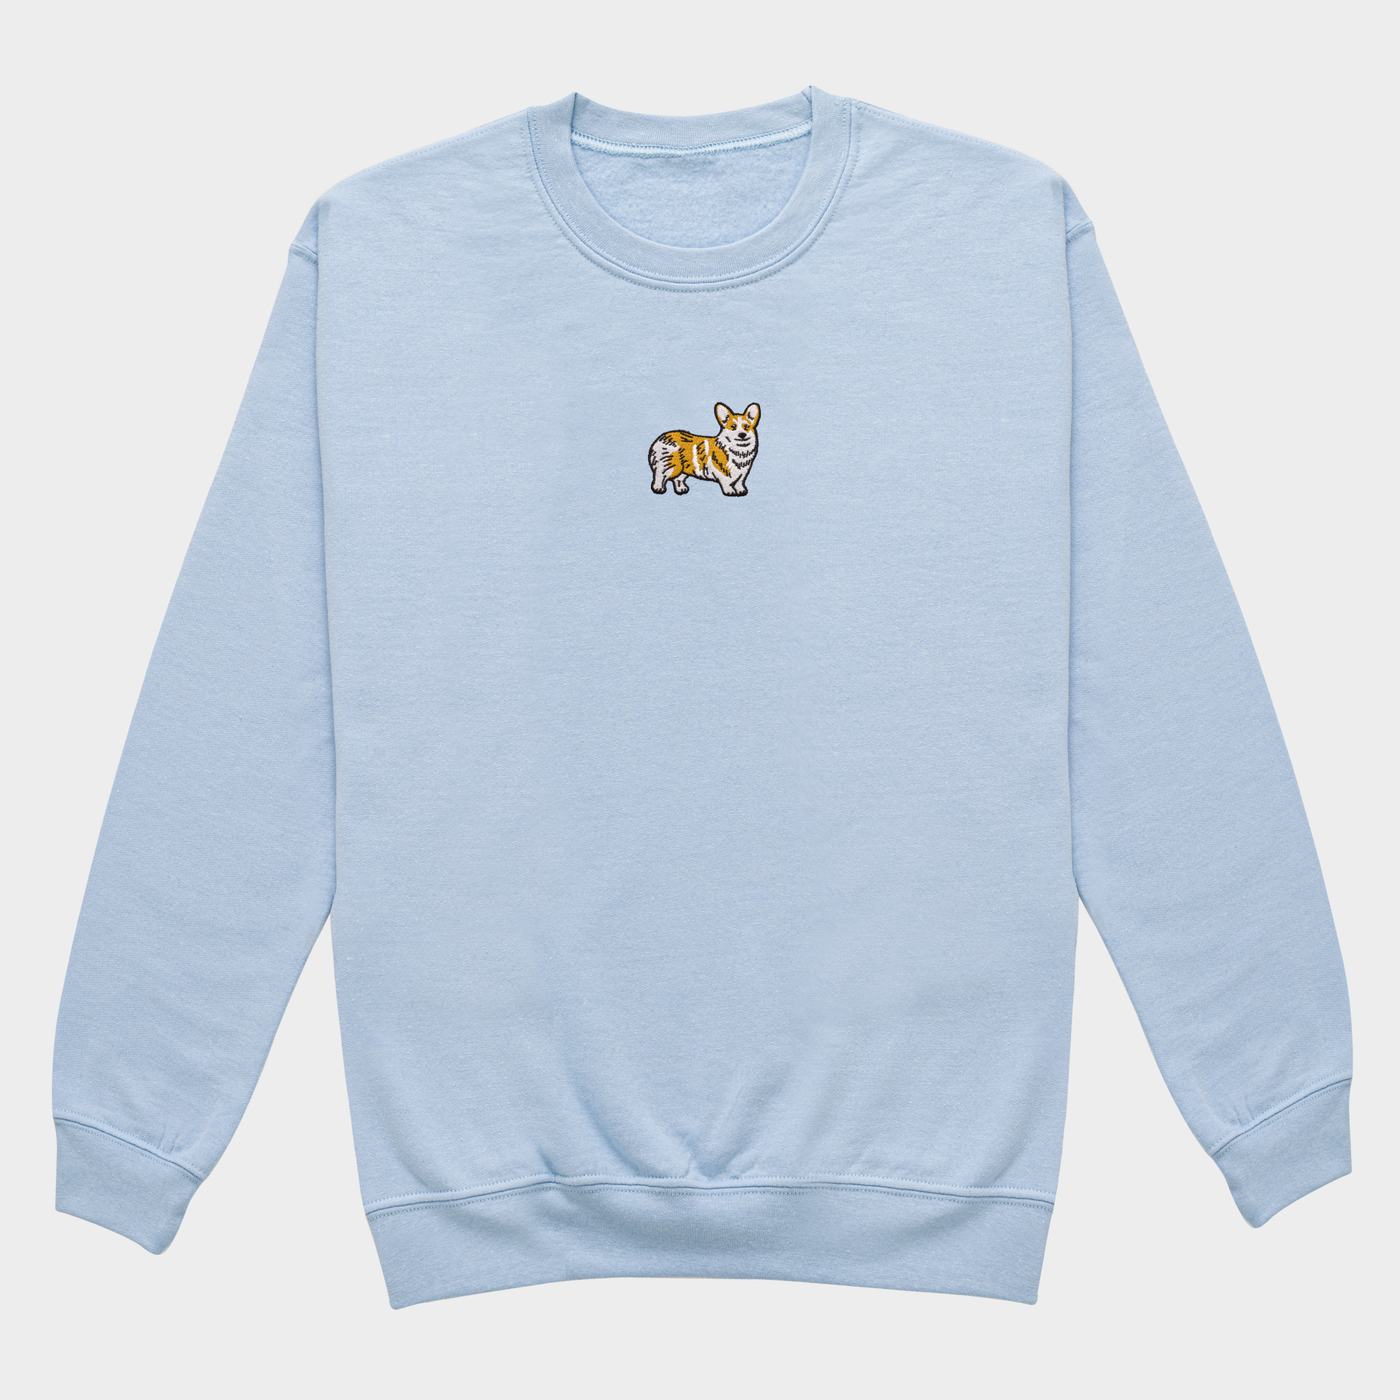 Bobby's Planet Women's Embroidered Corgi Sweatshirt from Paws Dog Cat Animals Collection in Light Blue Color#color_light-blue